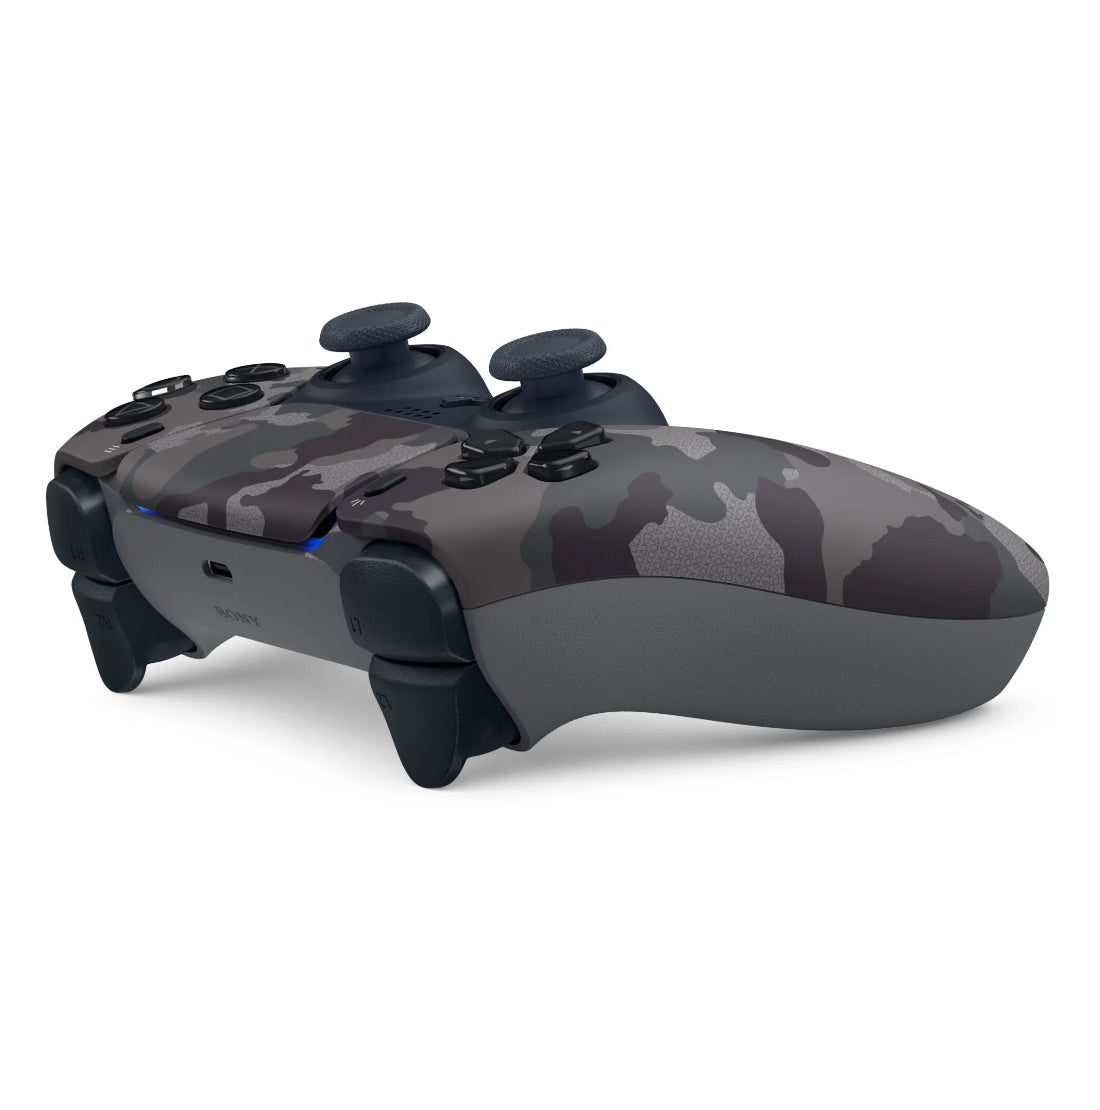 Sony Playstation 5 Disc Edition with Extra Gray Camo Controller and Dual Charging Dock Bundle - Pro-Distributing